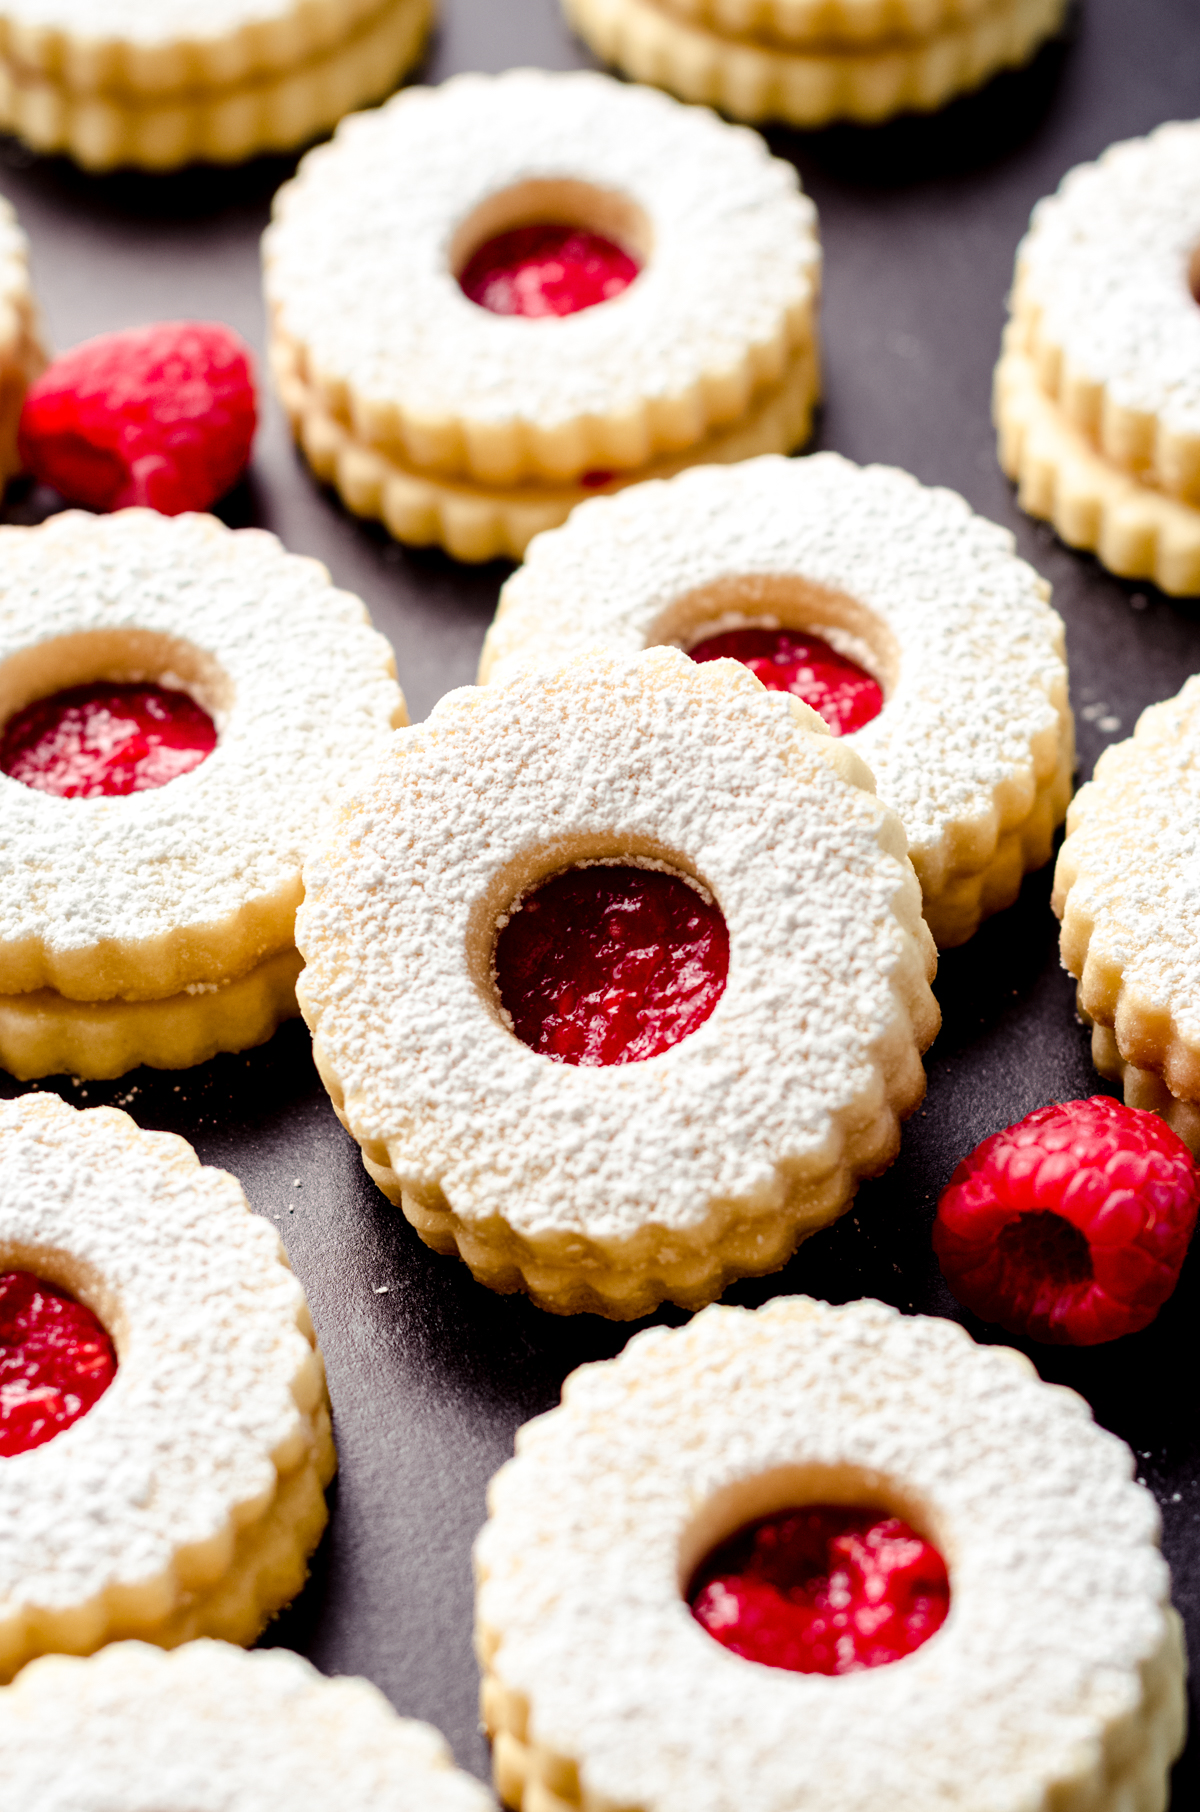 Raspberry Linzer cookies on a black surface.